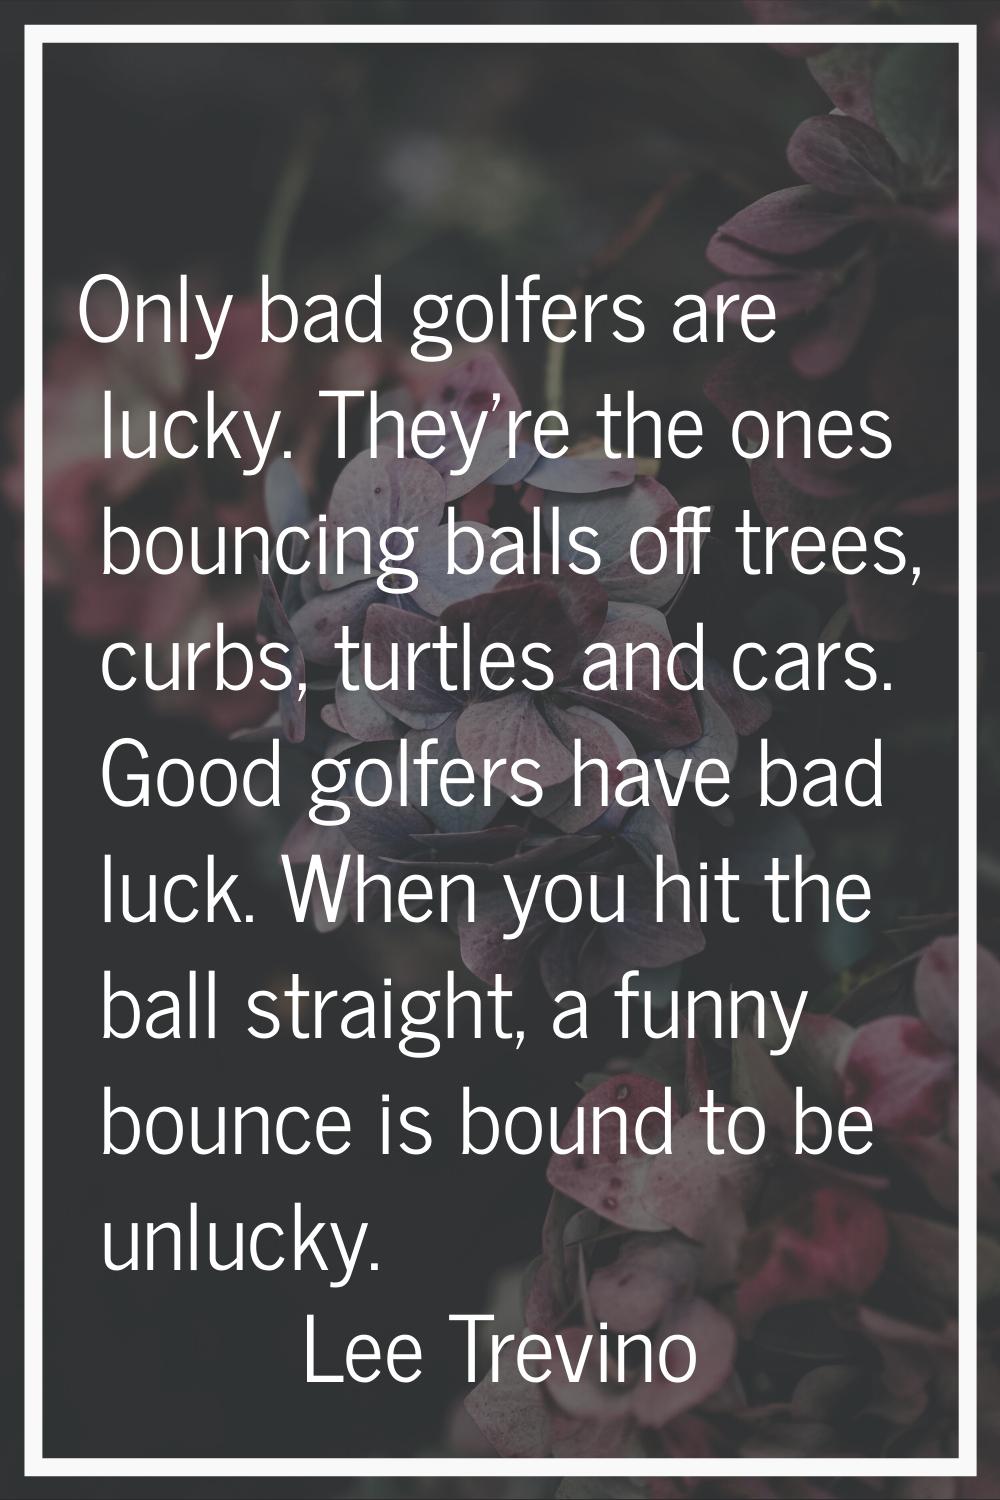 Only bad golfers are lucky. They're the ones bouncing balls off trees, curbs, turtles and cars. Goo